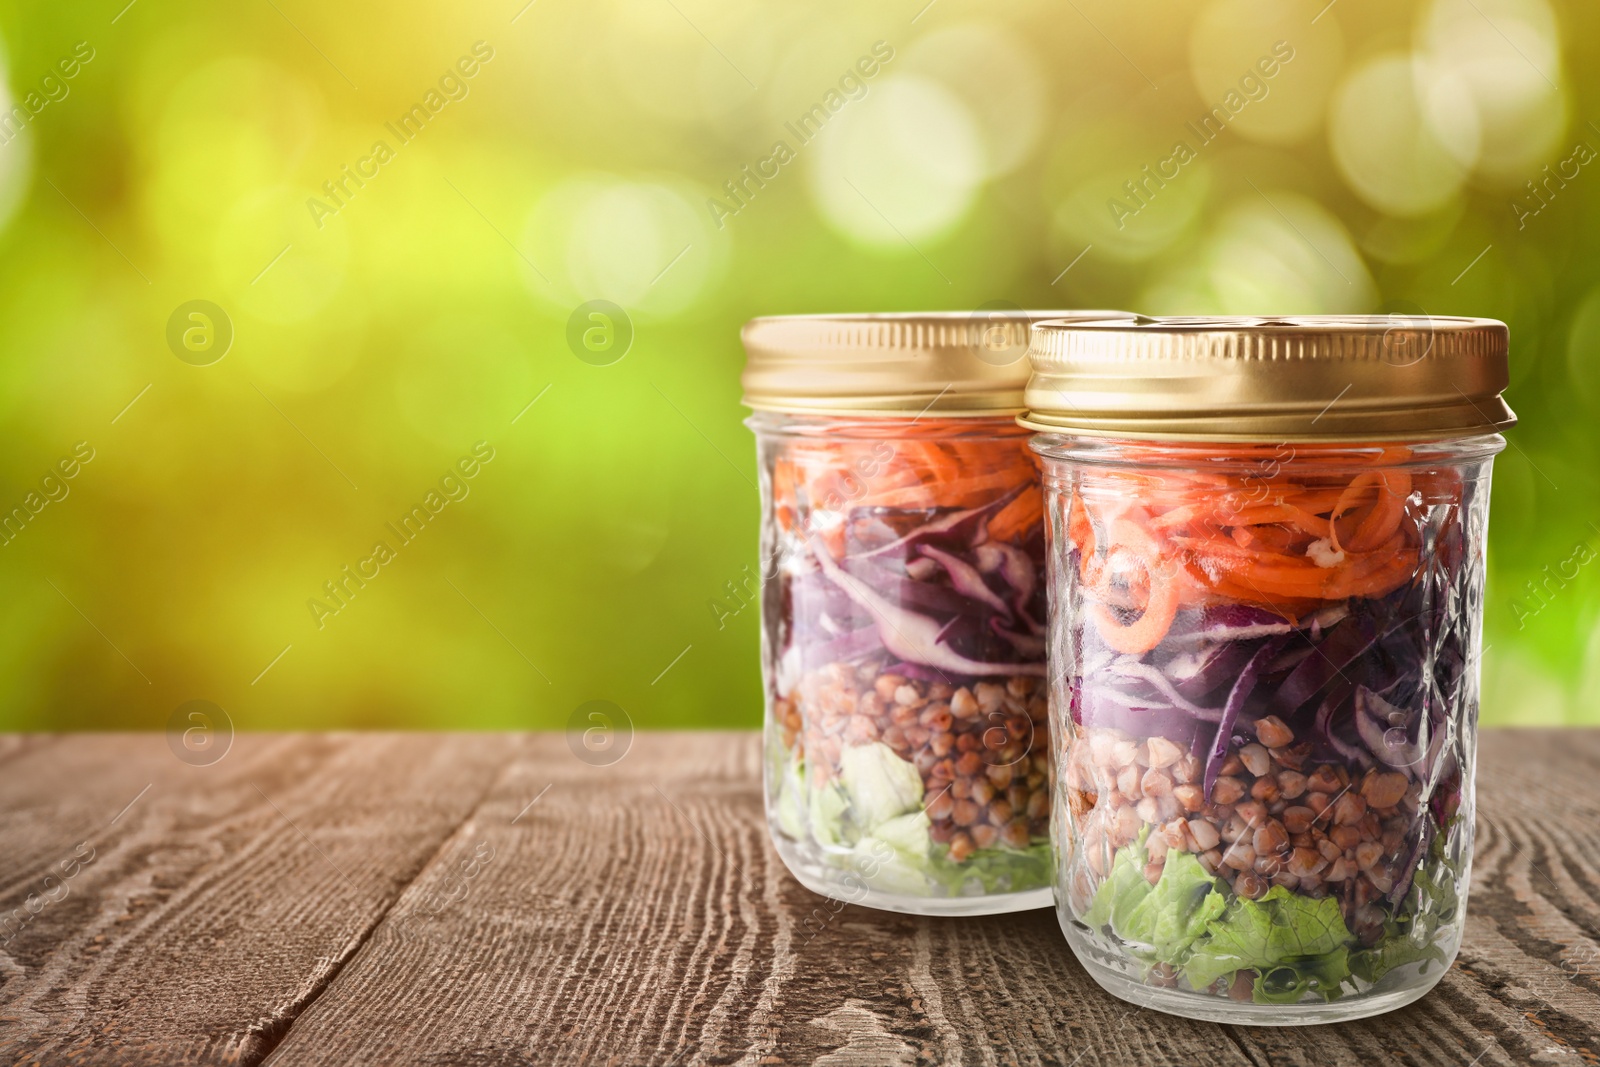 Image of Jars with healthy meal on wooden table against blurred background, space for text